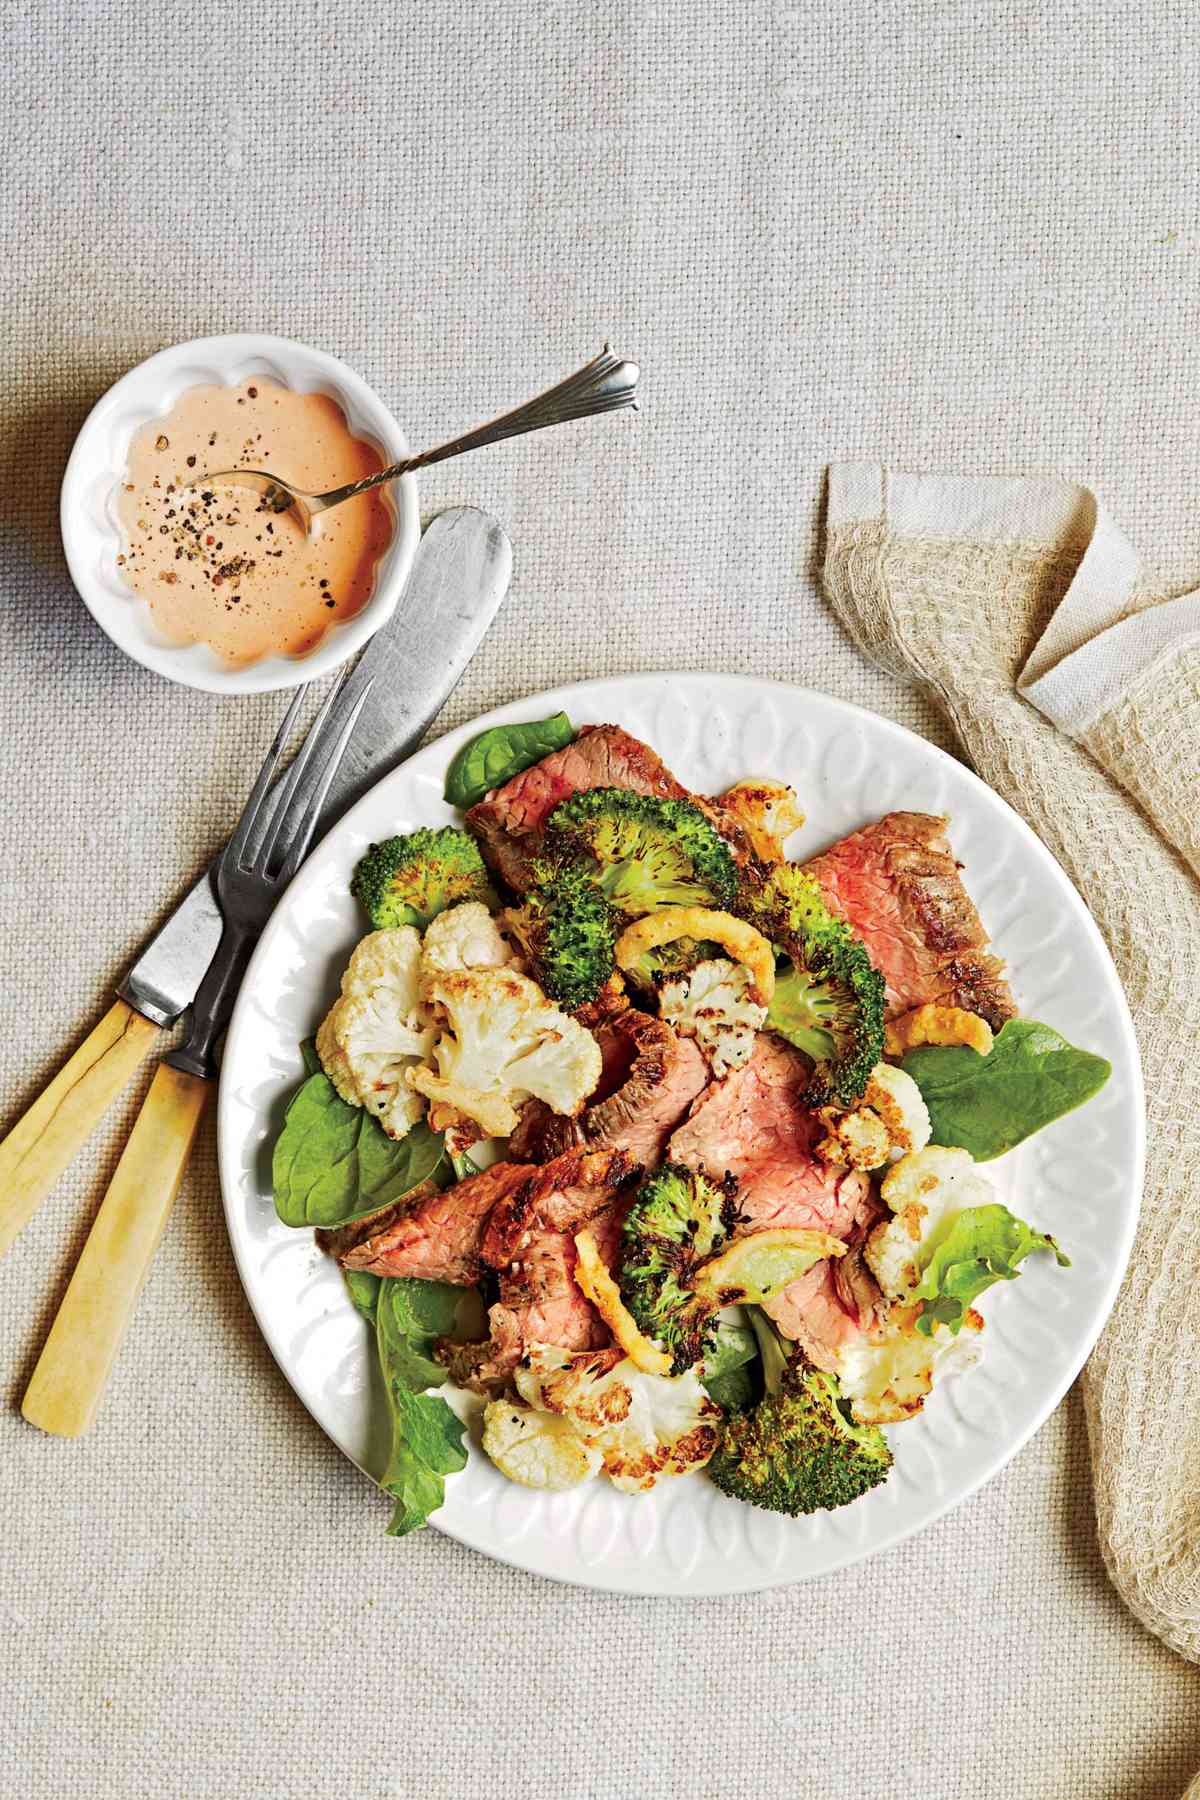 Charred Steak Salad with Spicy Dressing